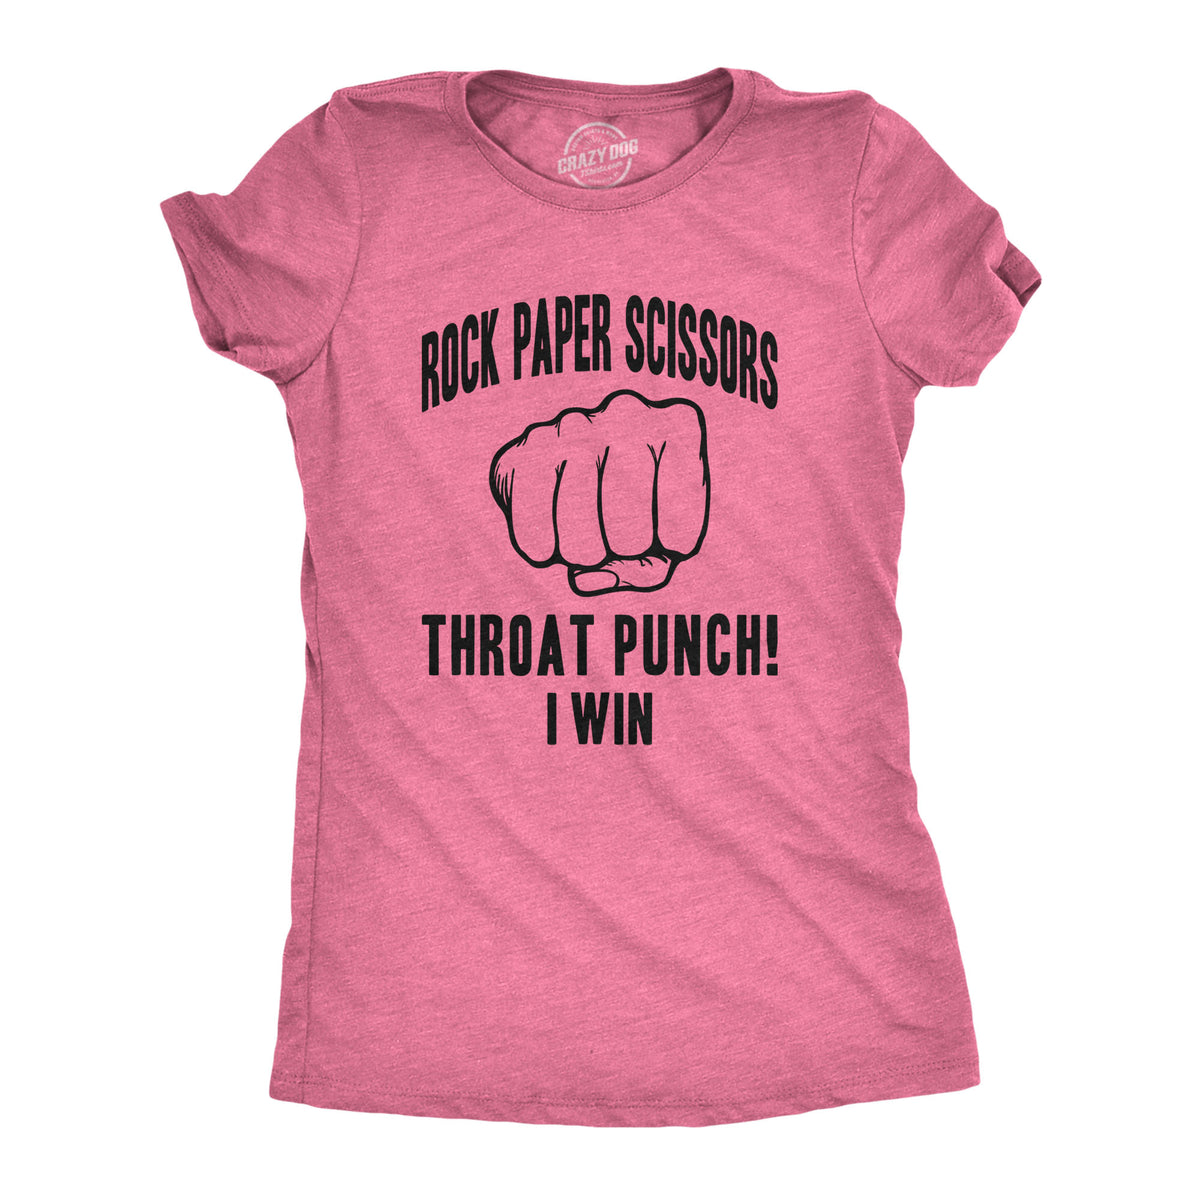 Funny Heather Pink Rock Paper Scissors Throat Punch Womens T Shirt Nerdy Sarcastic Tee